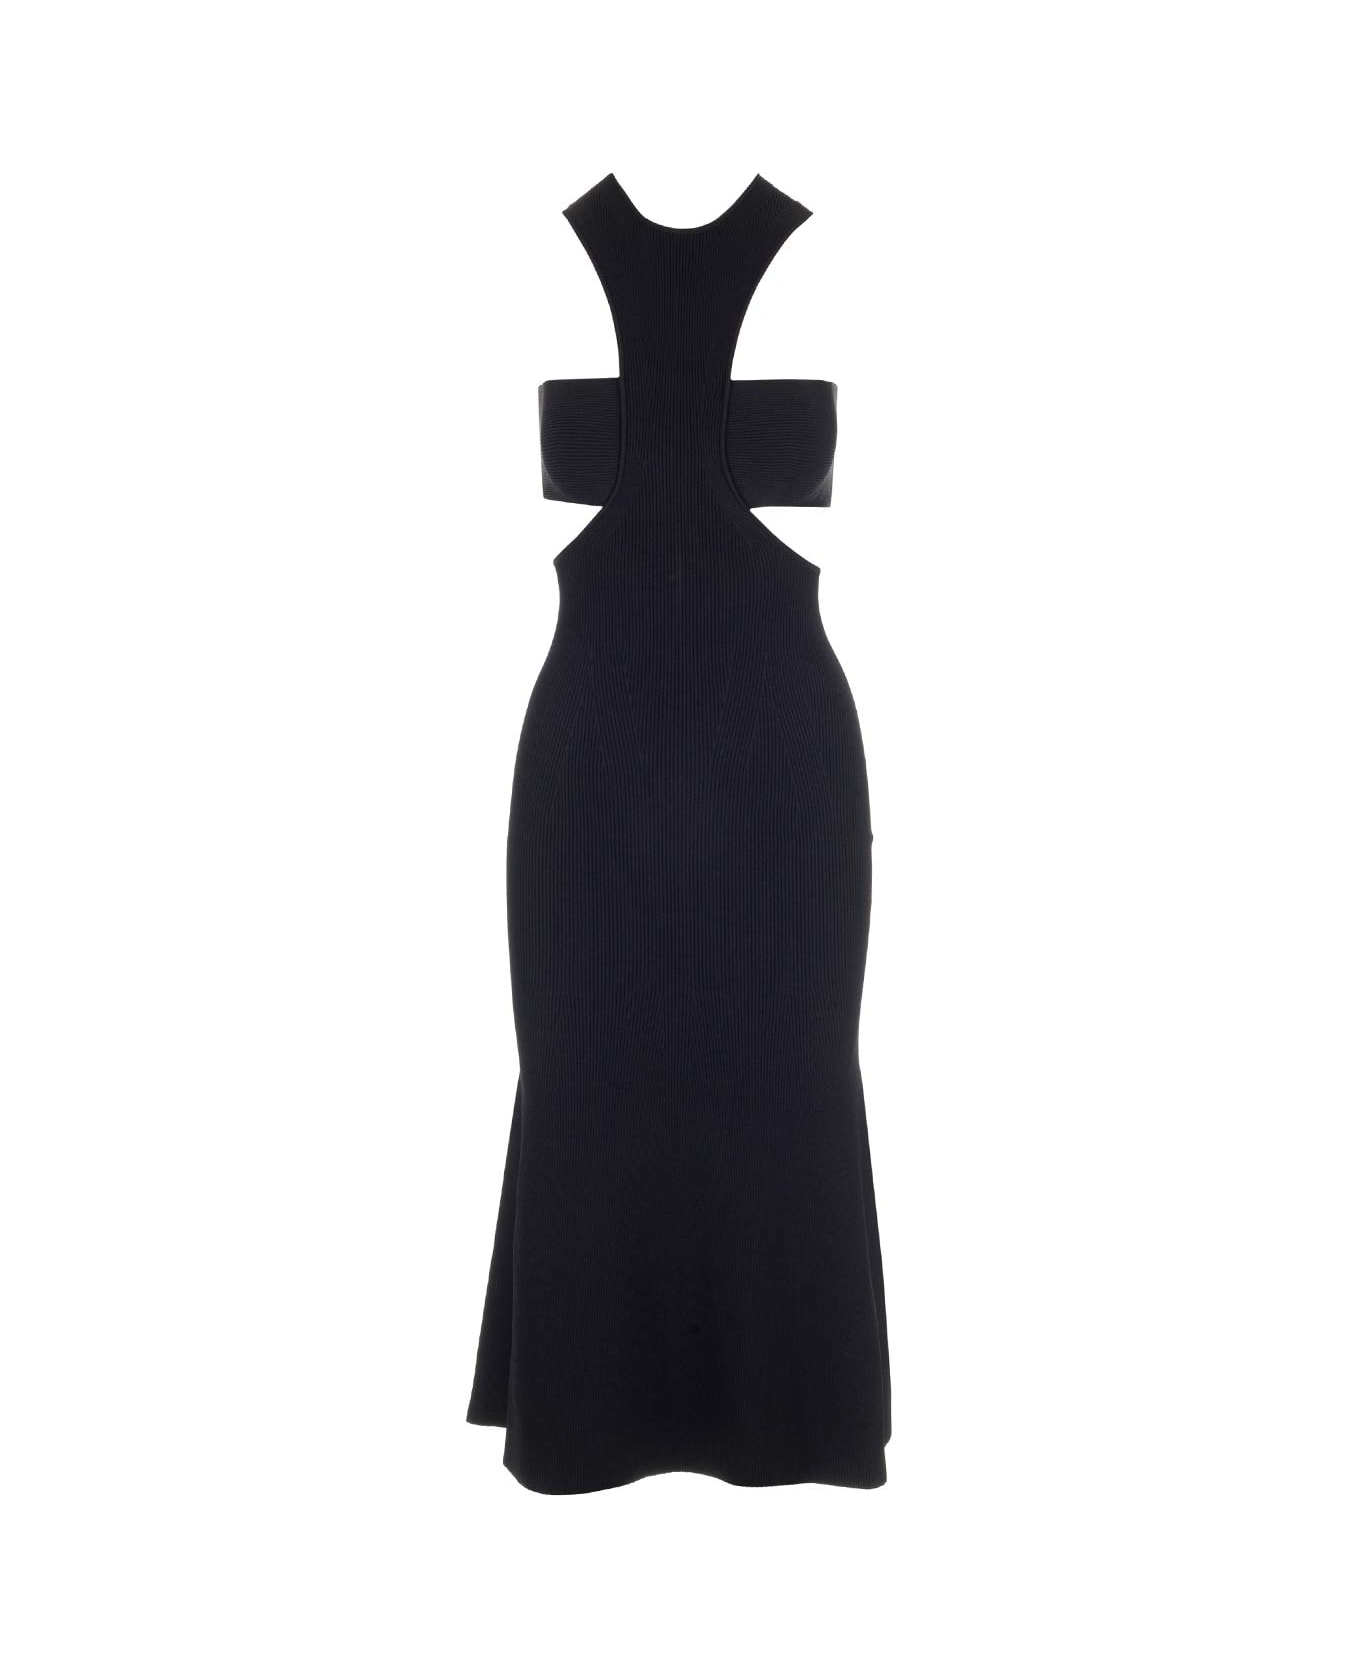 Alexander McQueen Dress With Harness And Cut-out In Black Ribbed Knit - Black